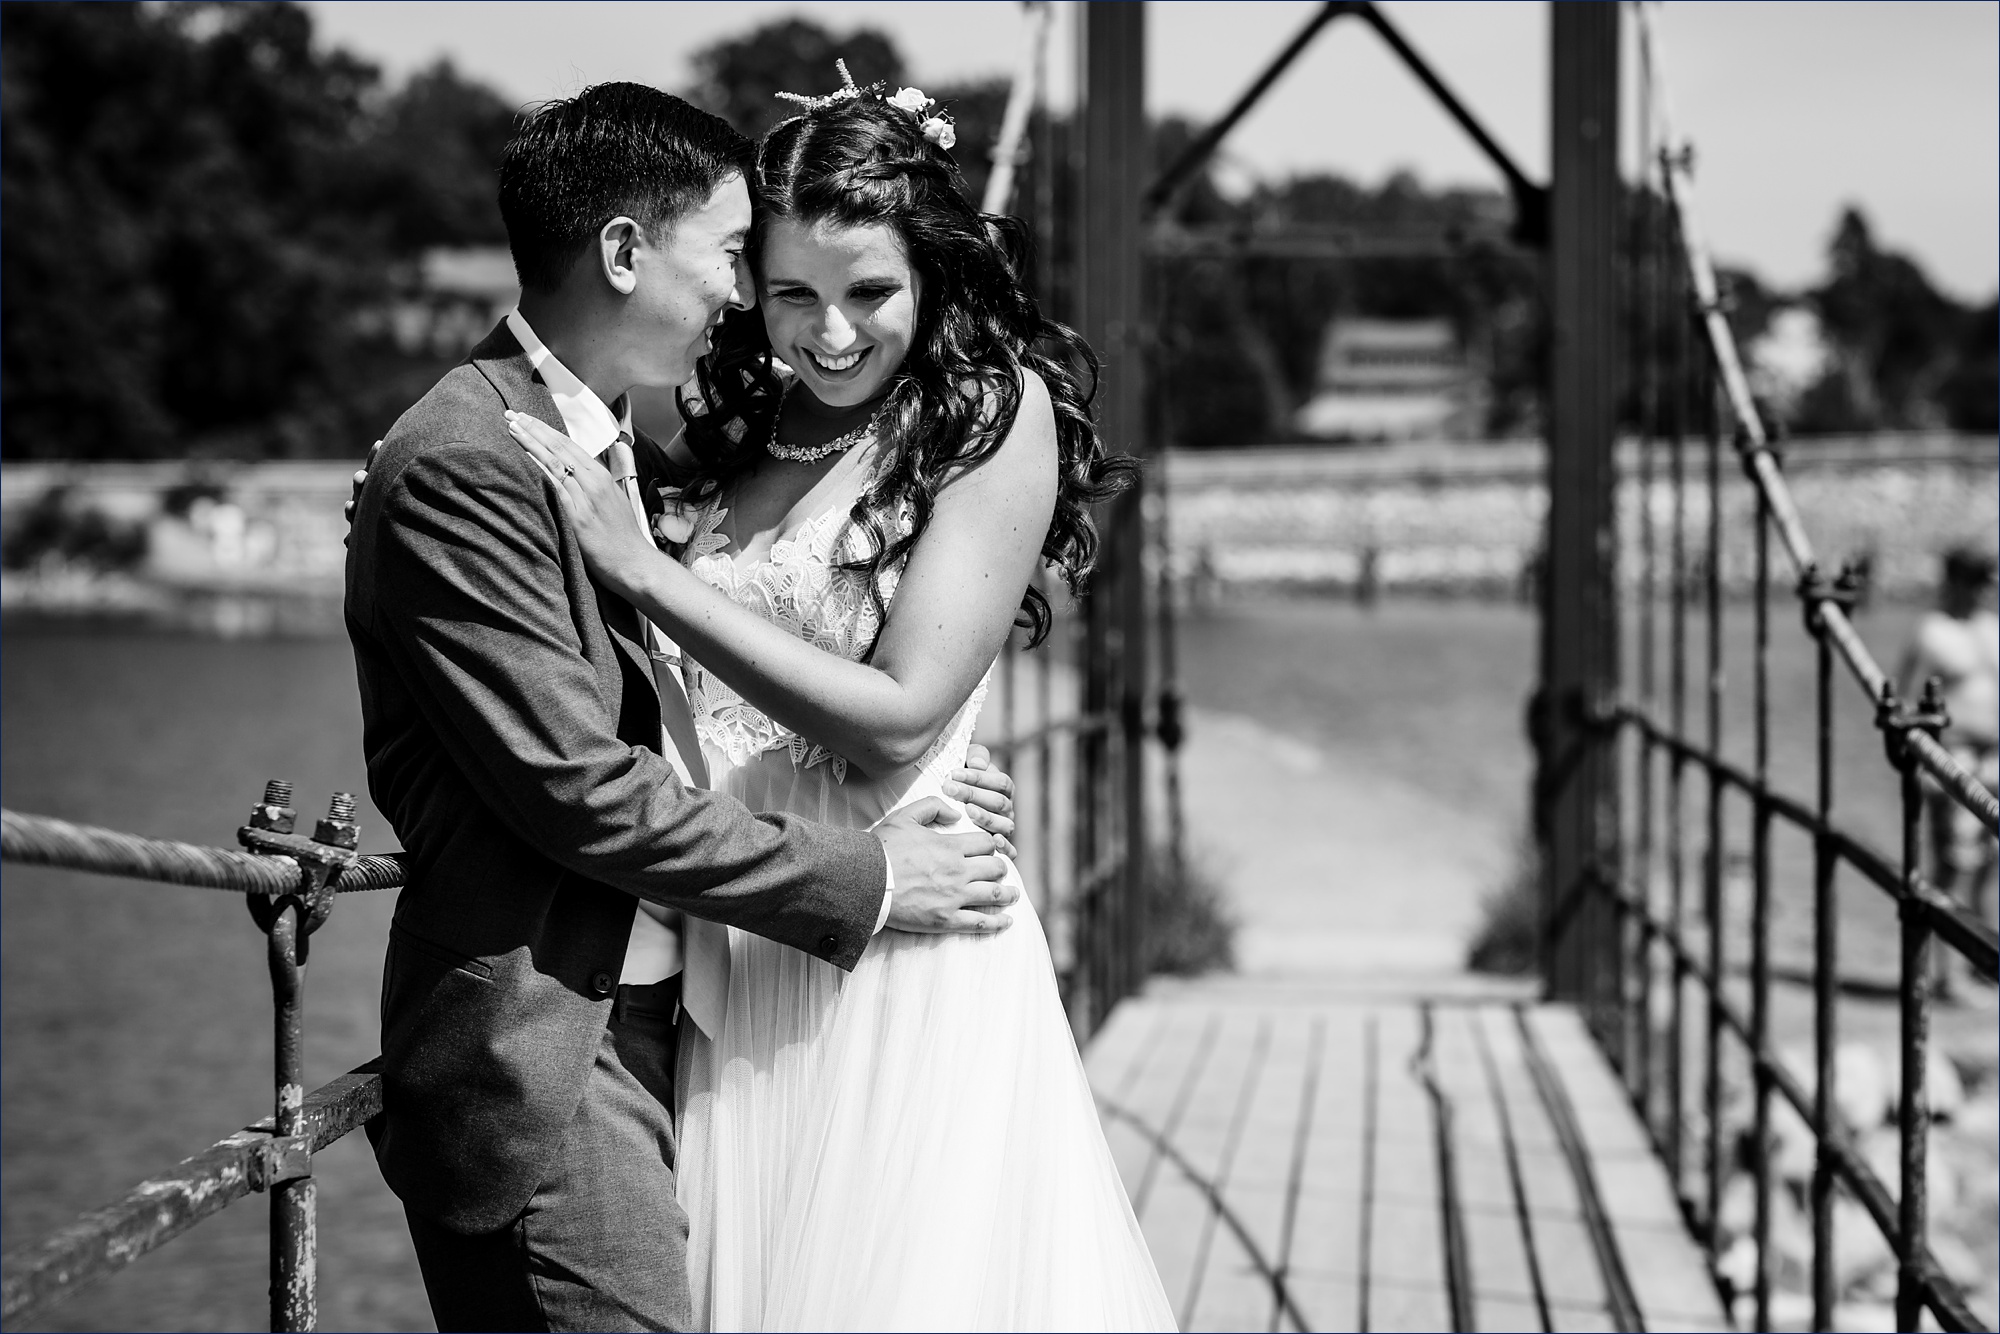 The groom makes the bride laugh in the sun while standing on the Wiggly Bridge in York